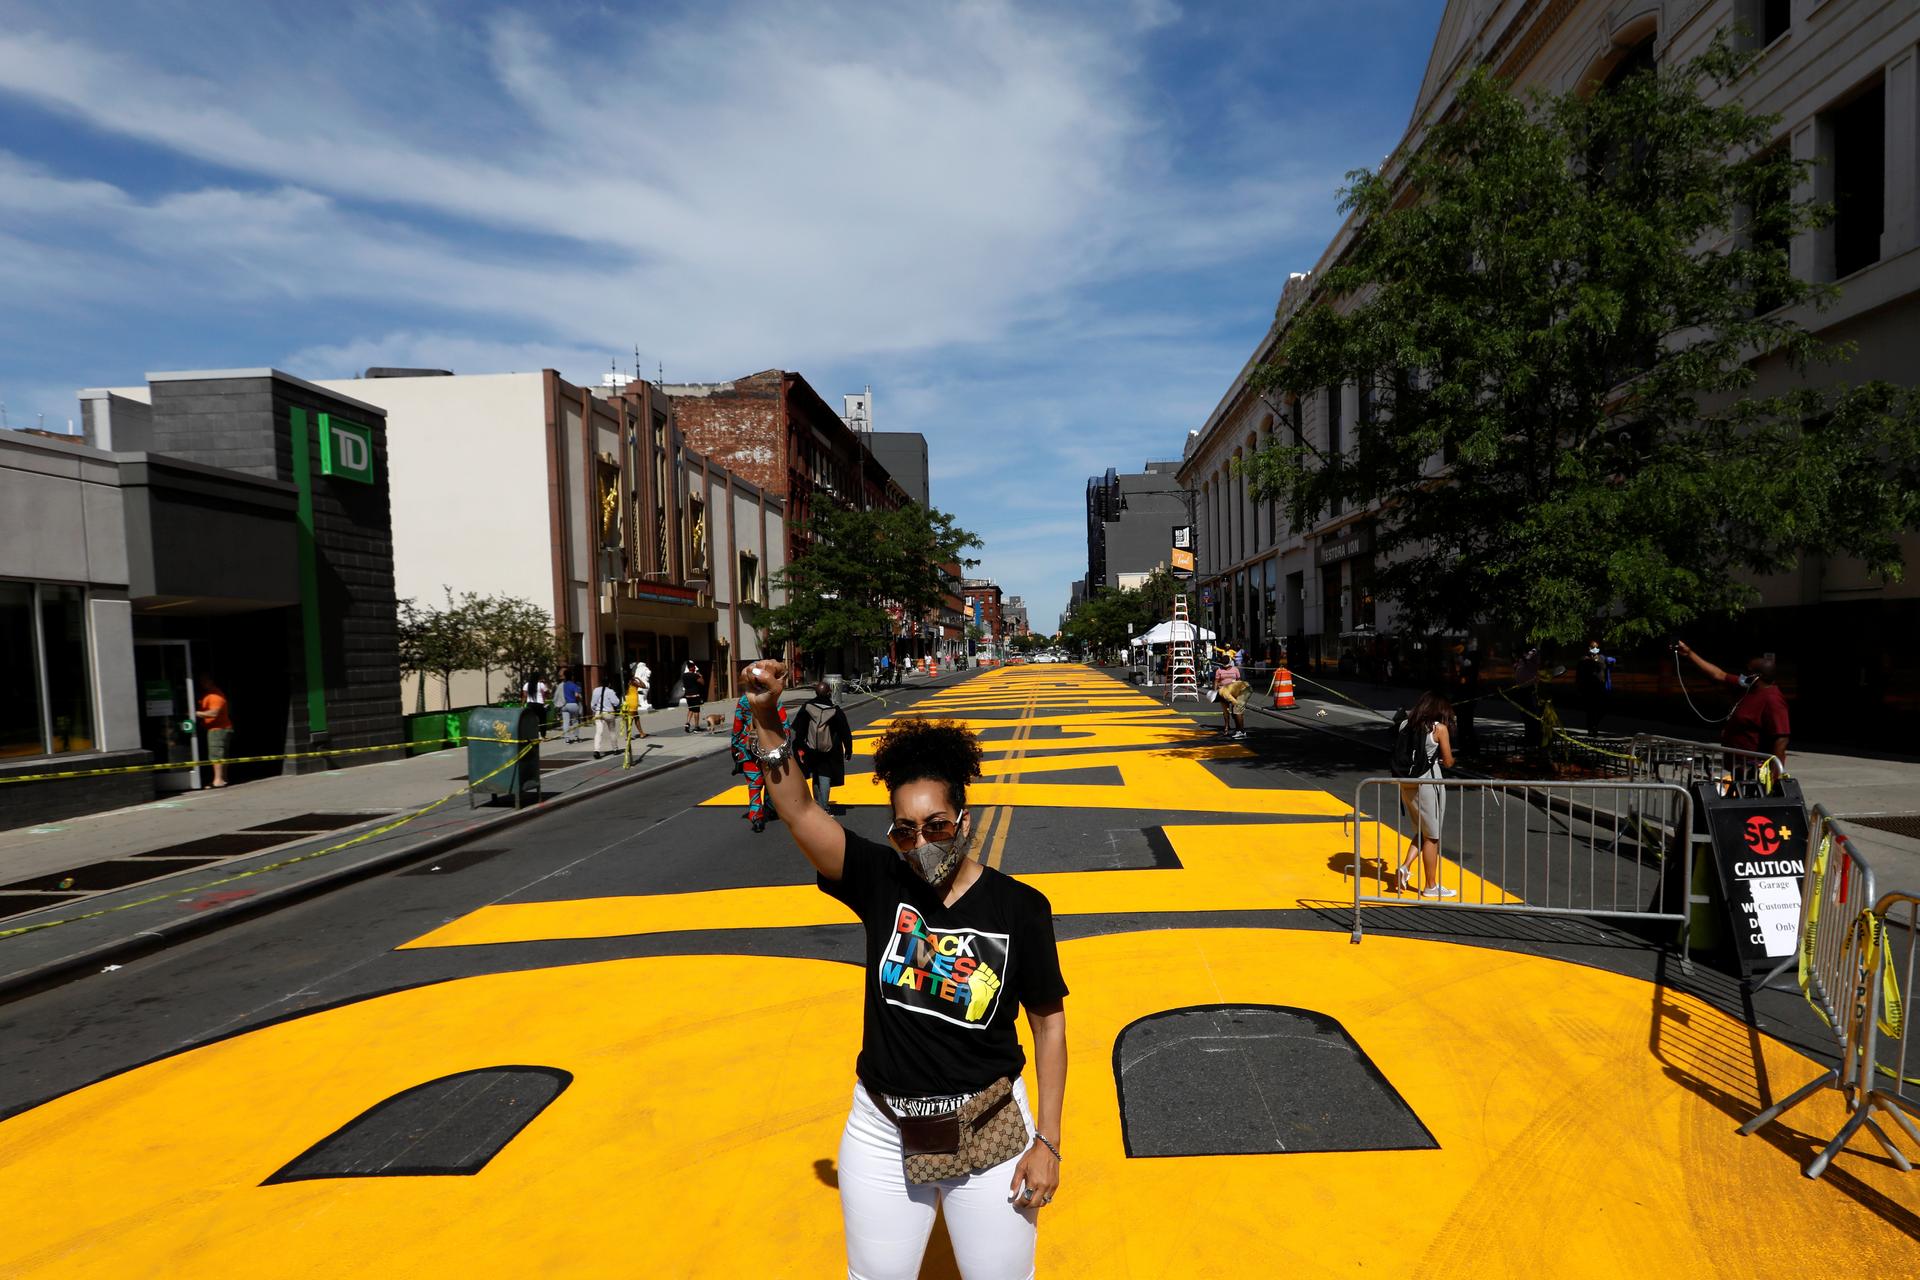 A woman poses in front of a Black Lives Matter mural on the street as a protest against racial inequality in the aftermath of the death in Minneapolis police custody of George Floyd, in Brooklyn, New York, June 16, 2020.  